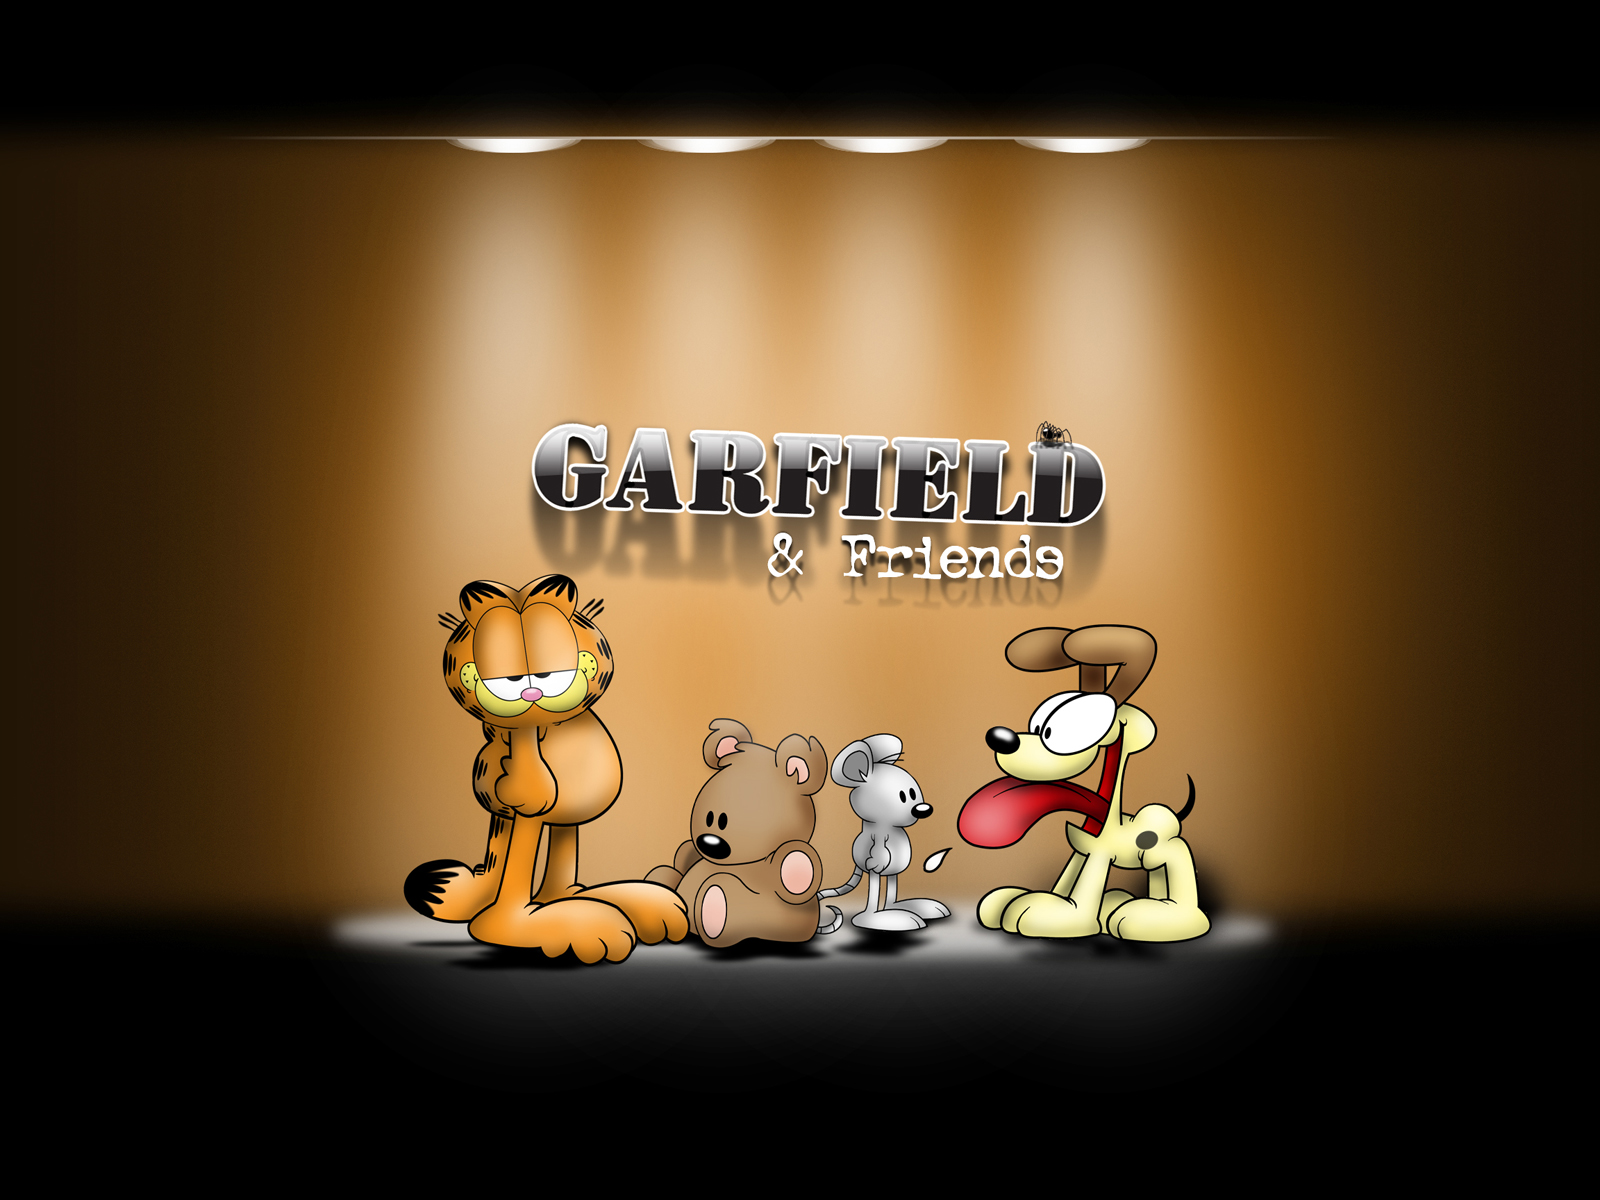 Free Download Garfield Wallpaper For Iphone 4 1600x10 For Your Desktop Mobile Tablet Explore 77 Garfield Backgrounds Garfield Wallpaper Screensavers Garfield Wallpaper For Windows 8 Garfield Wallpapers Quotes